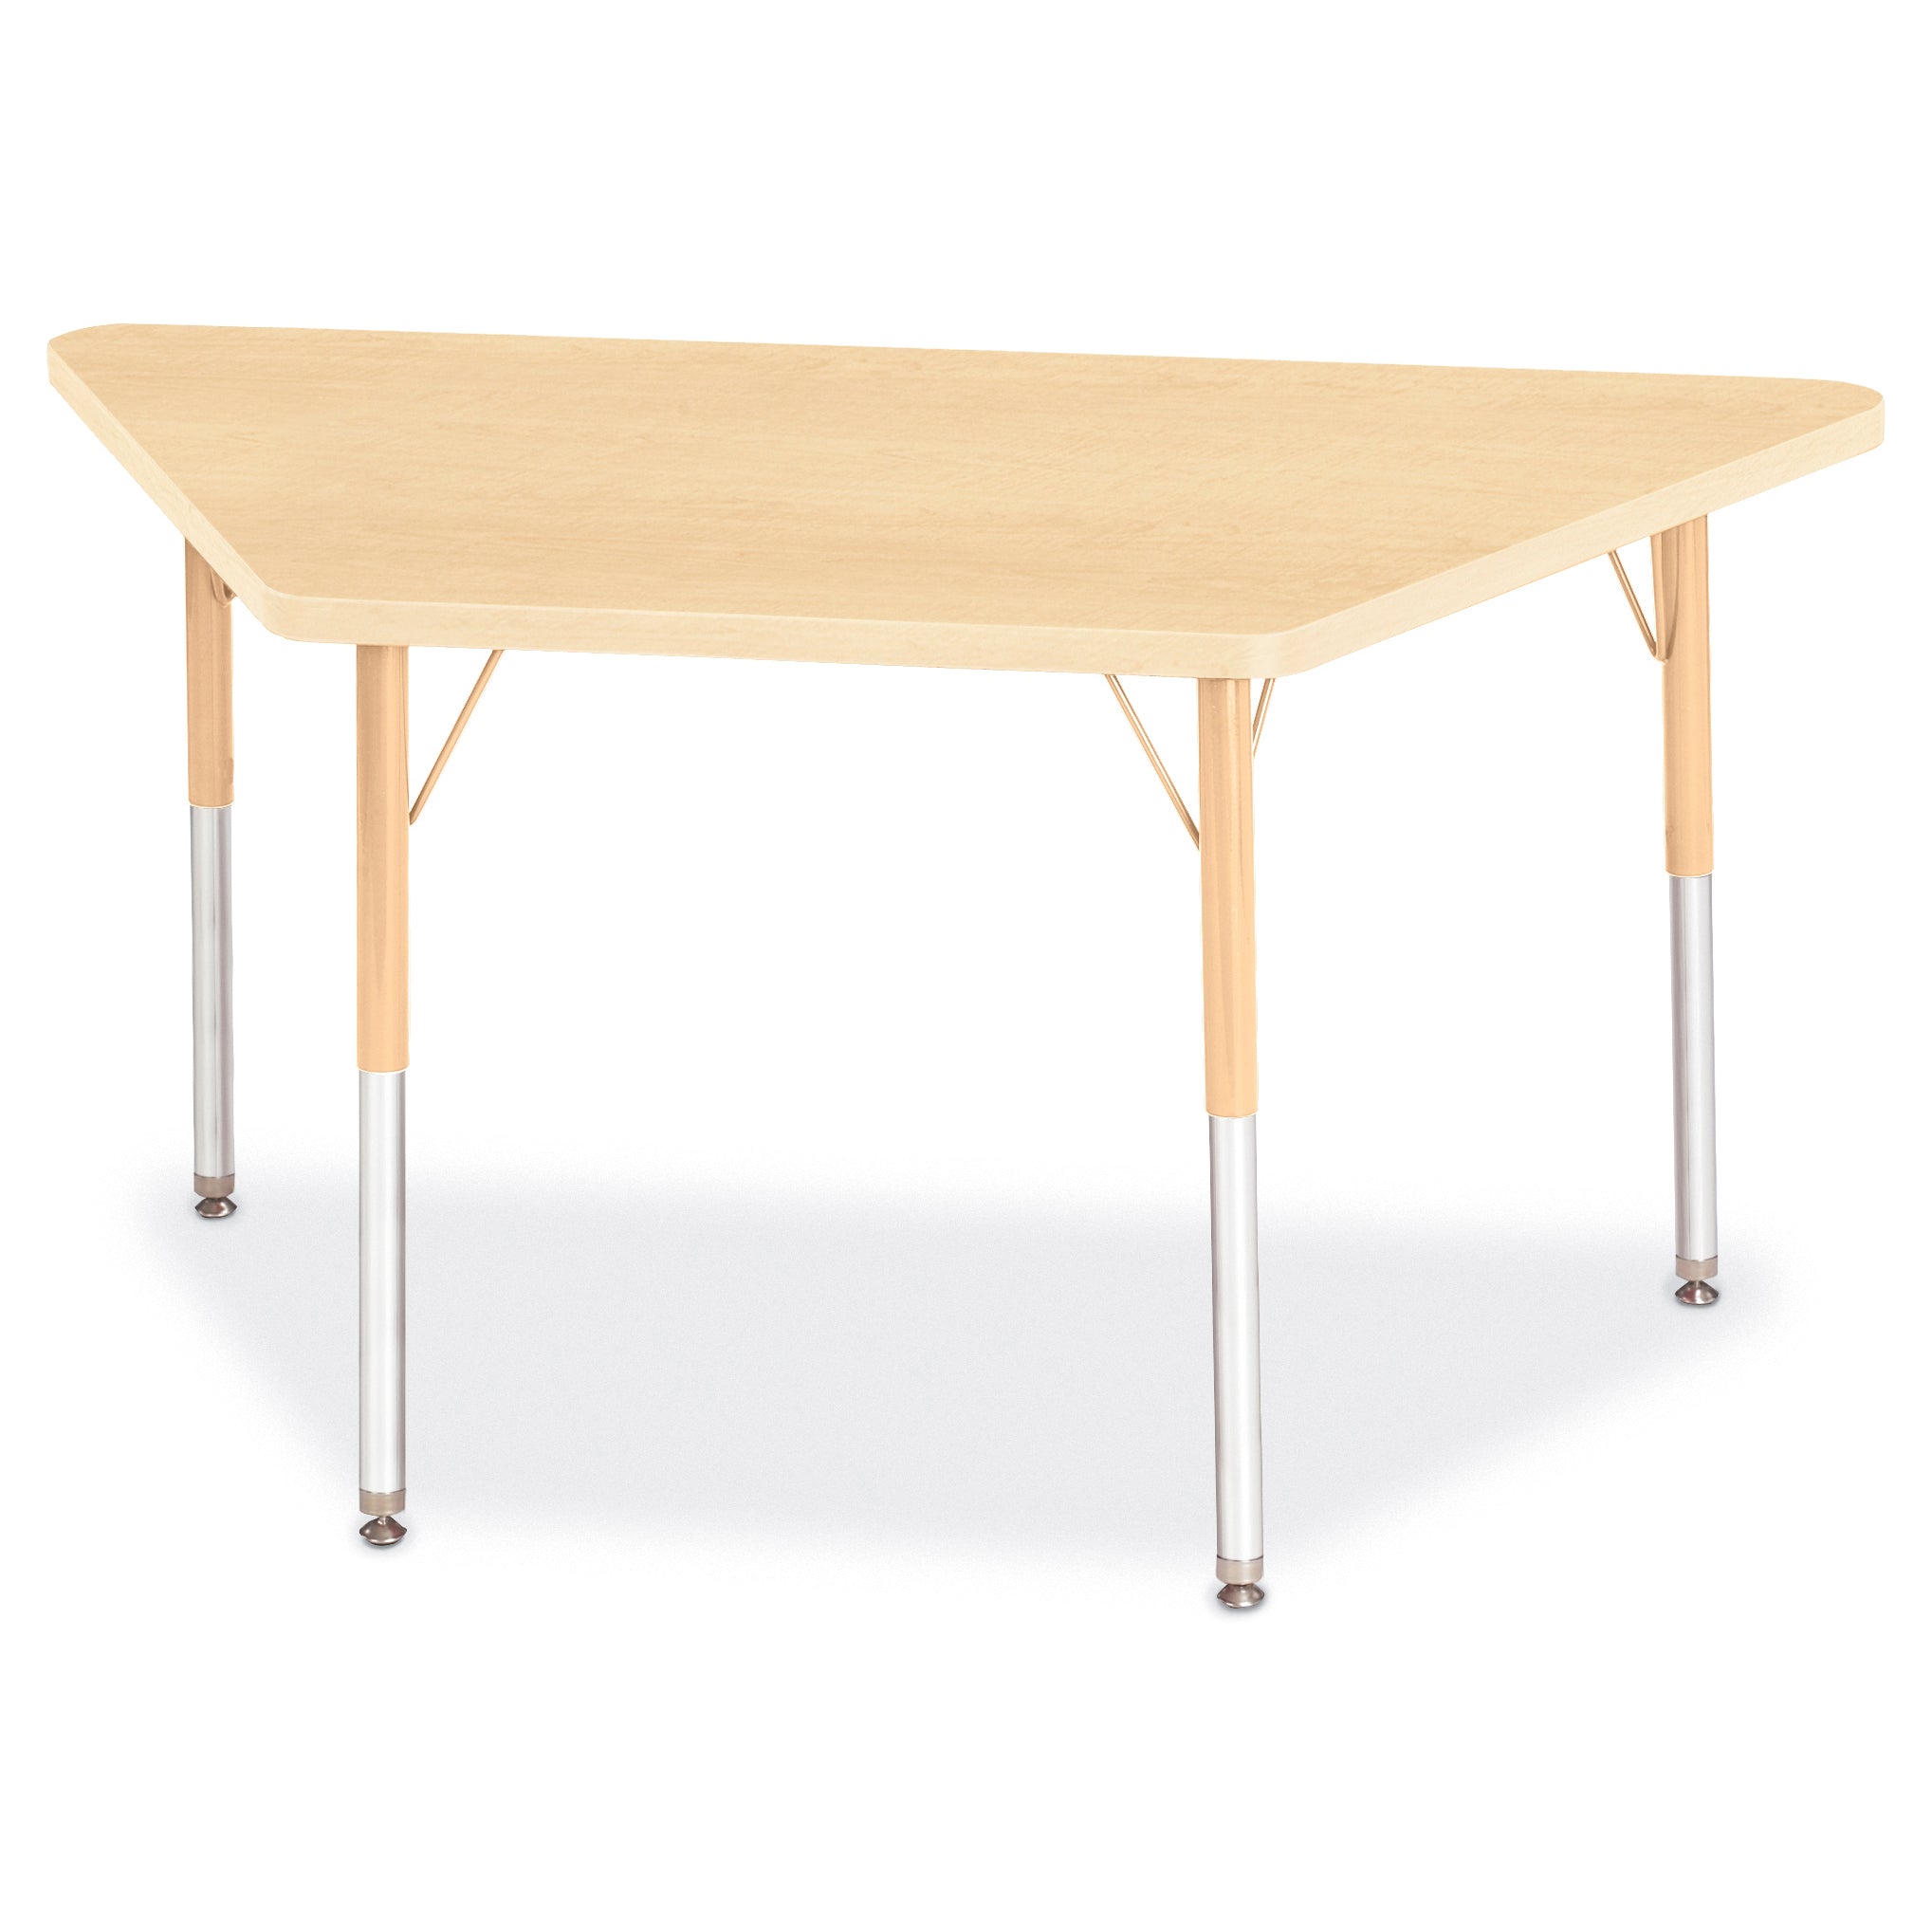 6438JCA251, Berries Trapezoid Activity Tables - 24" X 48", A-height - Maple/Maple/Camel